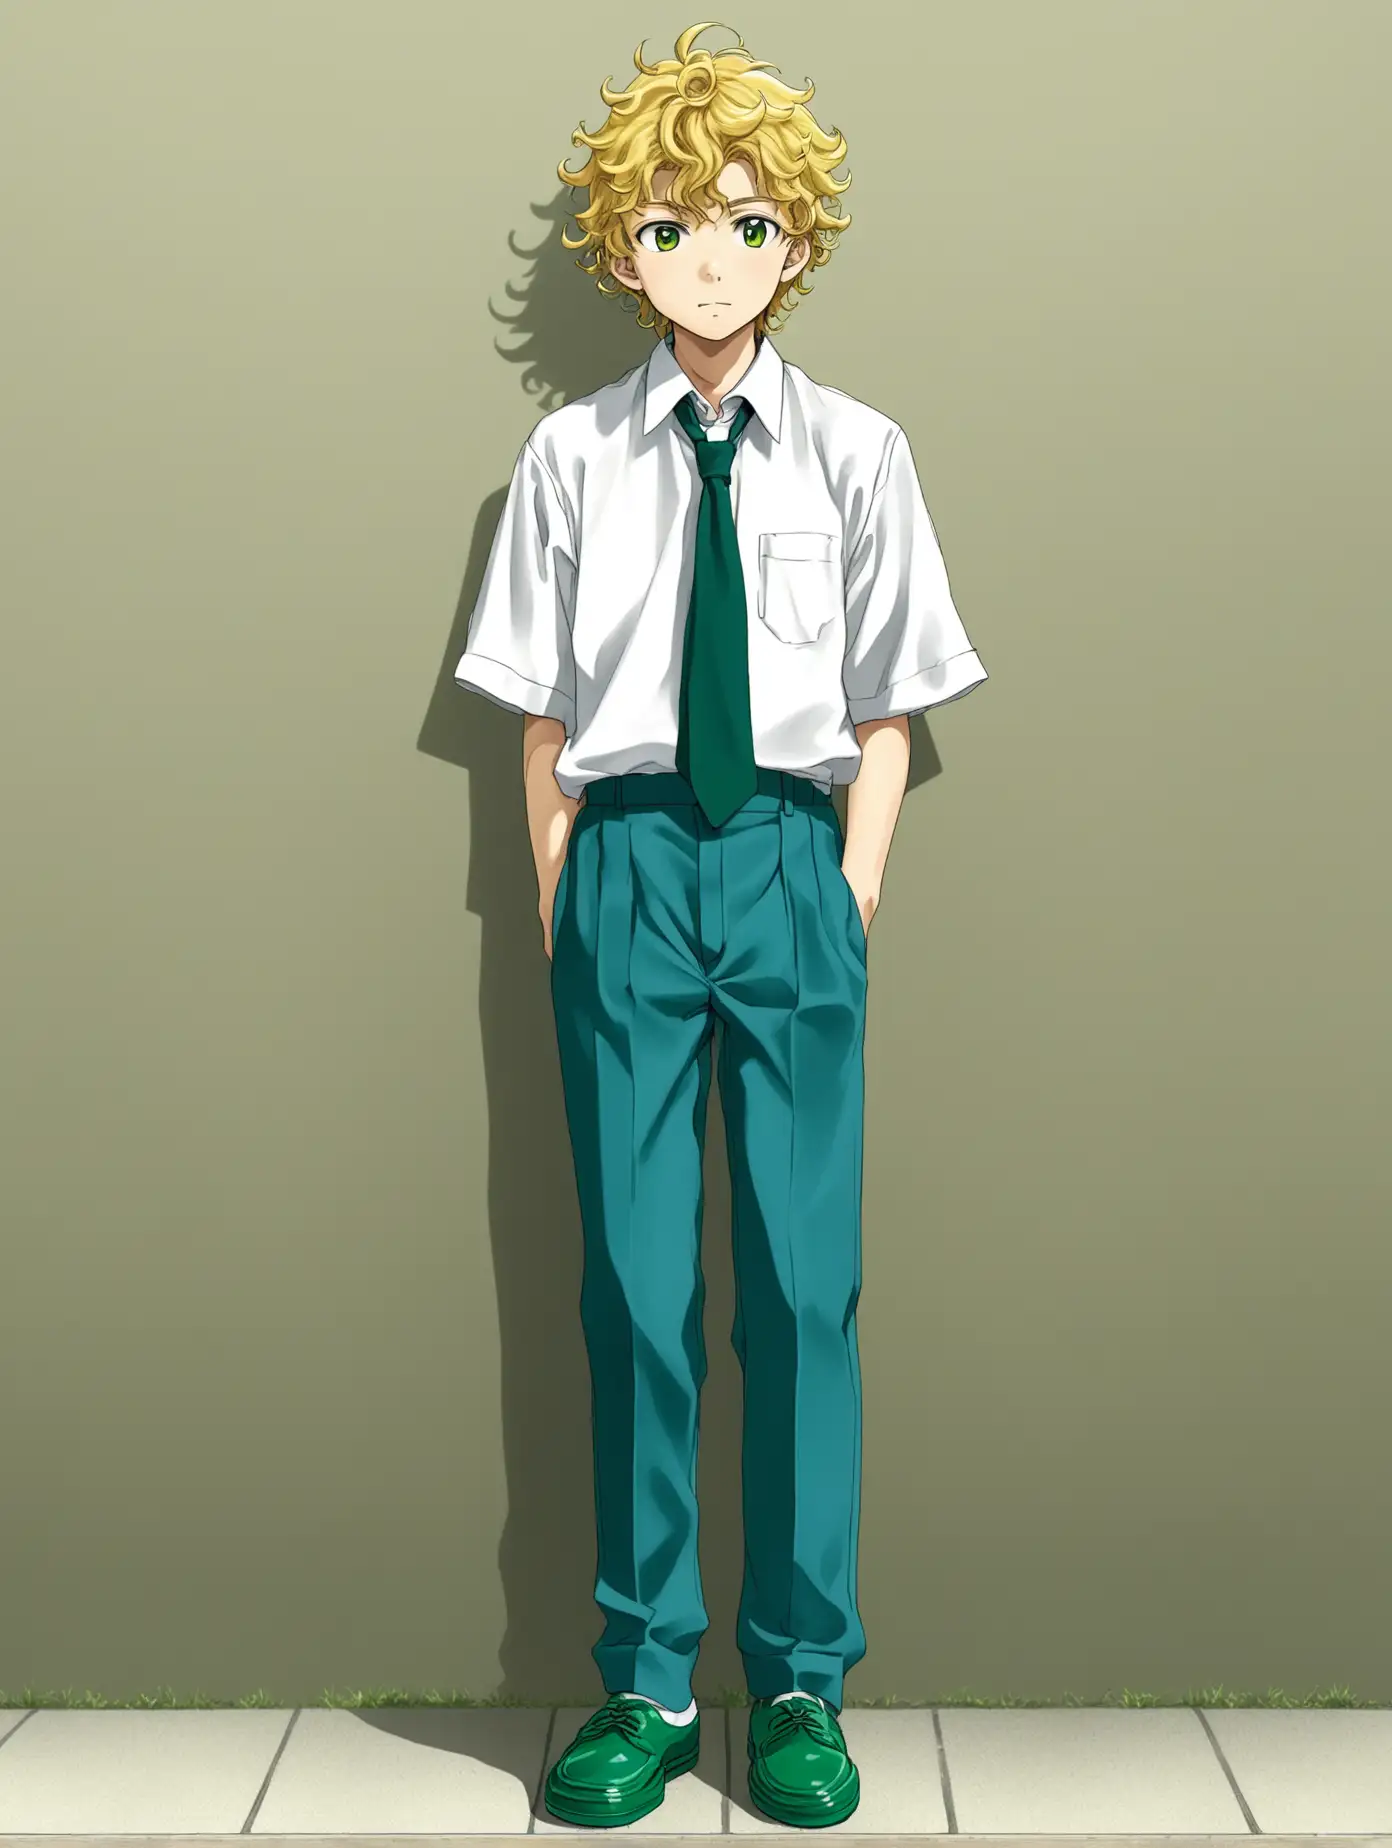 A sixteen year old Japanese boy with curly yellow hair who uses school uniforms, wears green shoes, and blue long pants